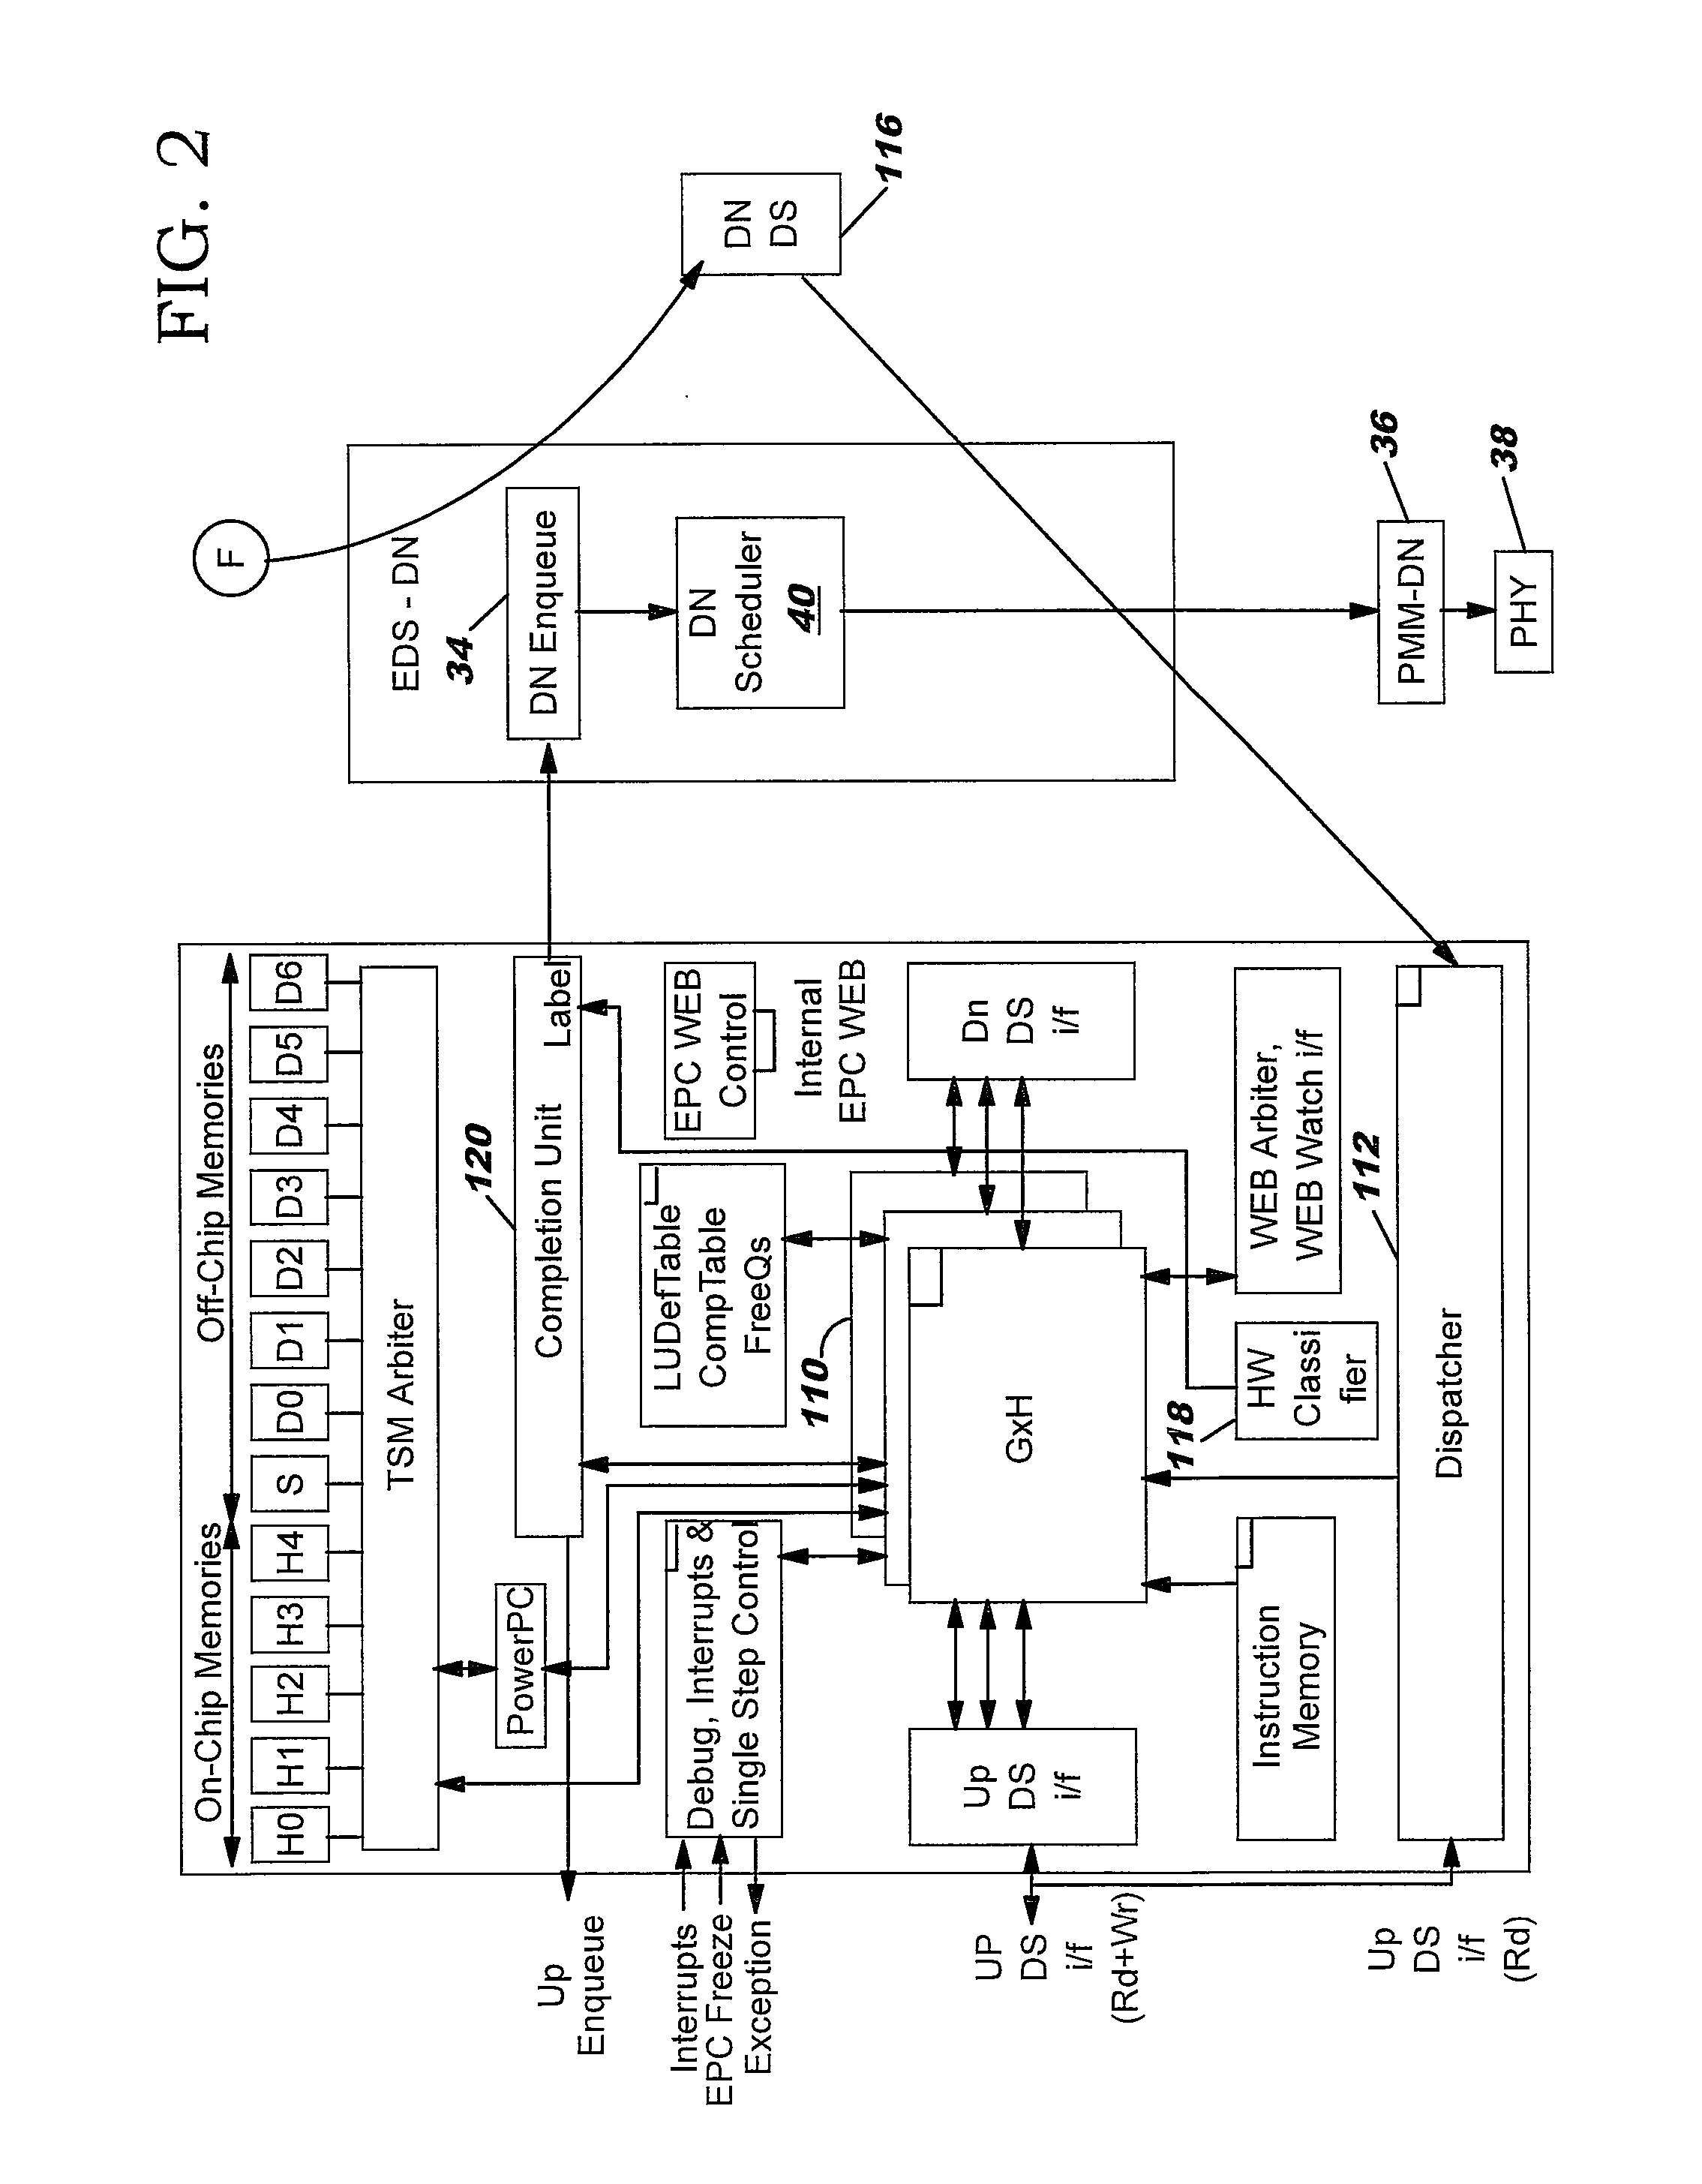 Method and system for network processor scheduling outputs using disconnect/reconnect flow queues